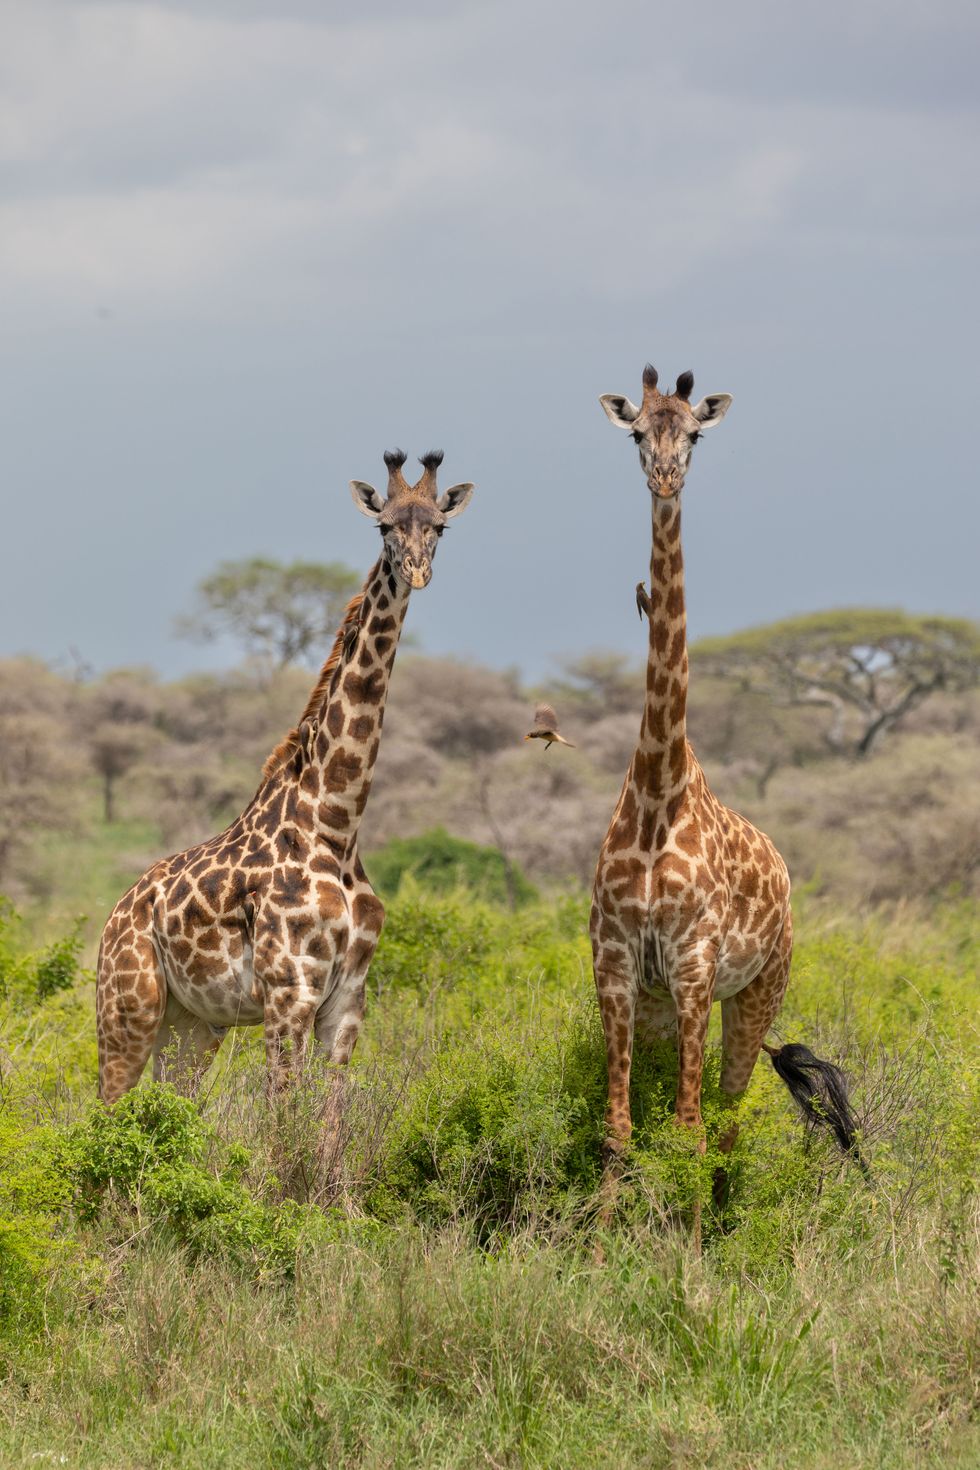 yellow billed oxpeckers flit between two giraffes